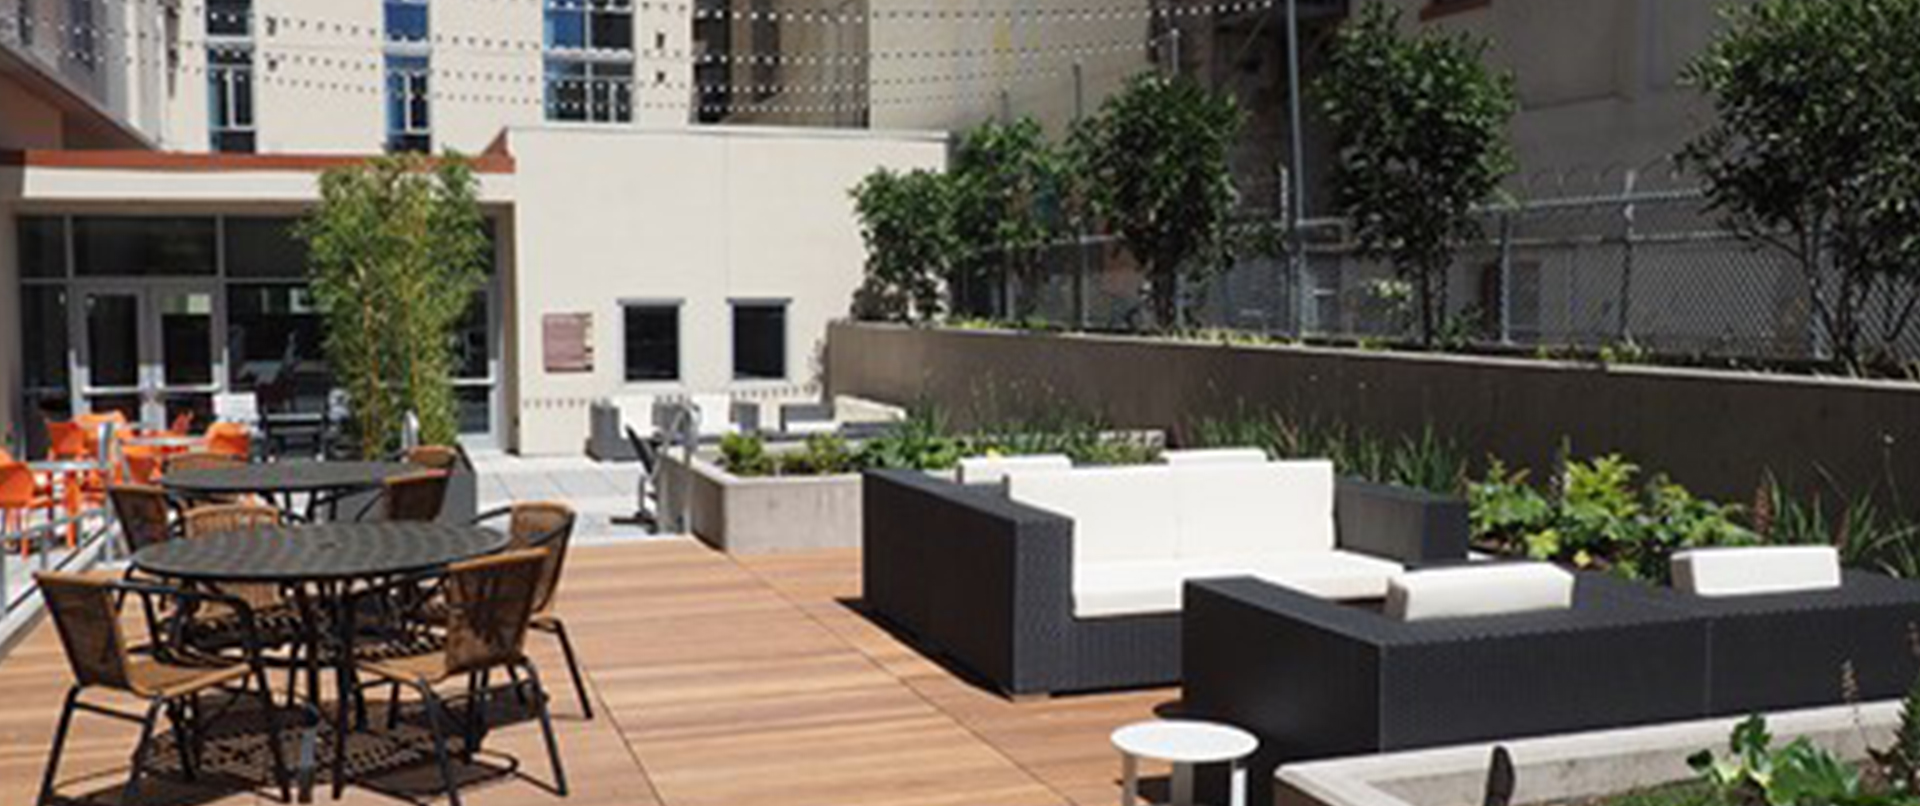 Rooftop Seating Area with Aluminum Cube Planters